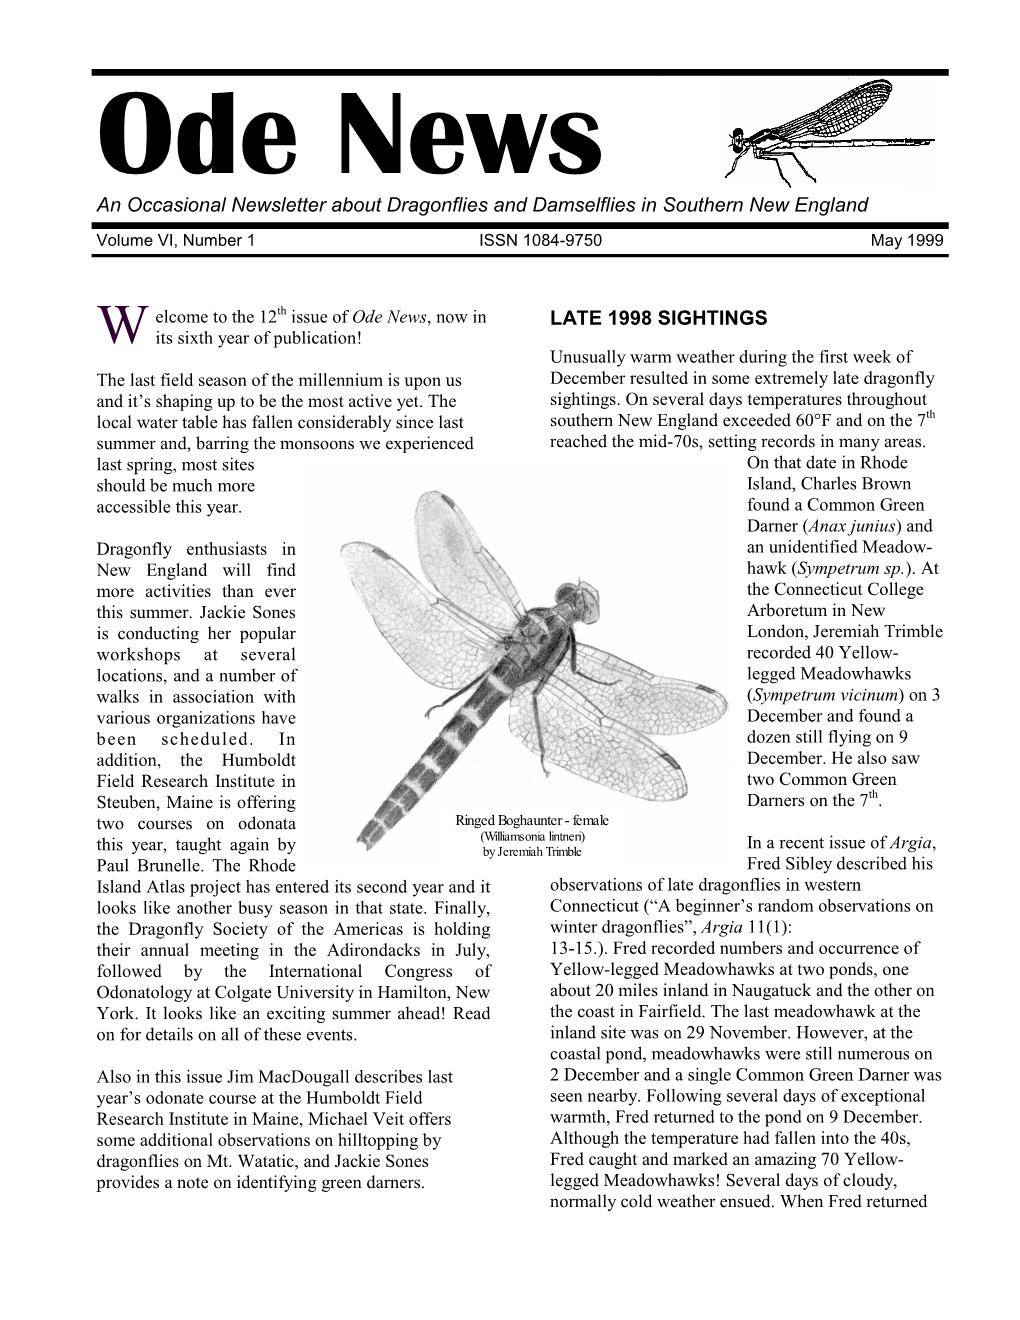 Ode News an Occasional Newsletter About Dragonflies and Damselflies in Southern New England